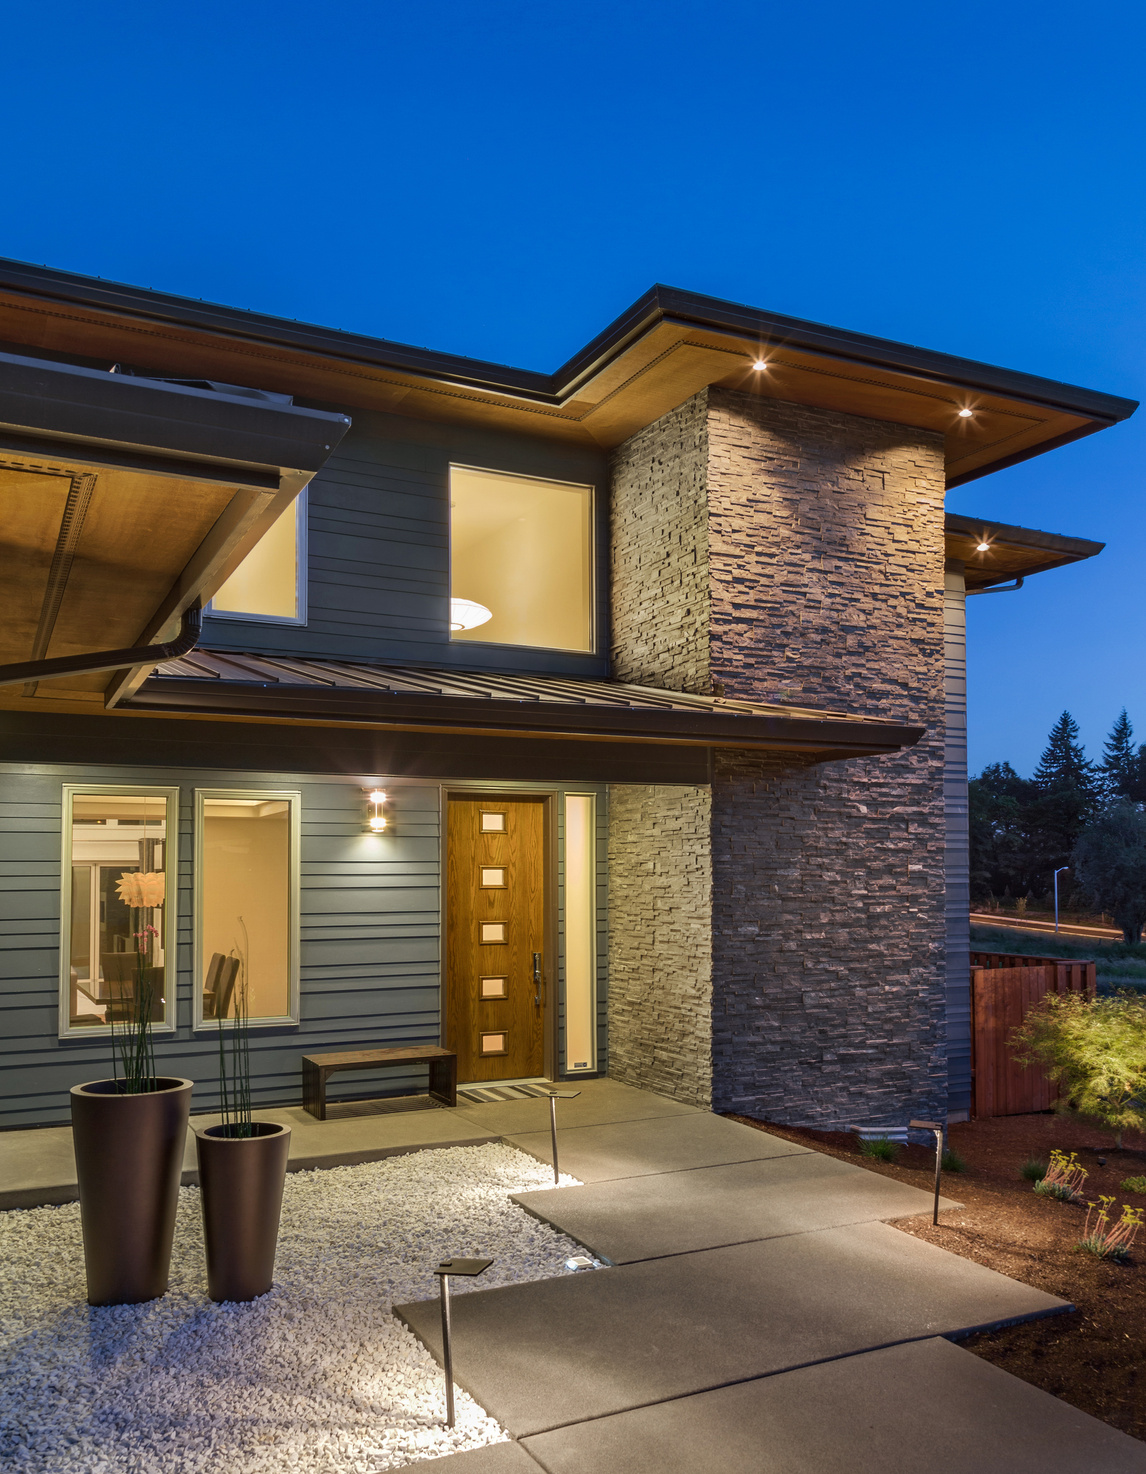 Beautiful Exterior of New Luxury Home at Twilight